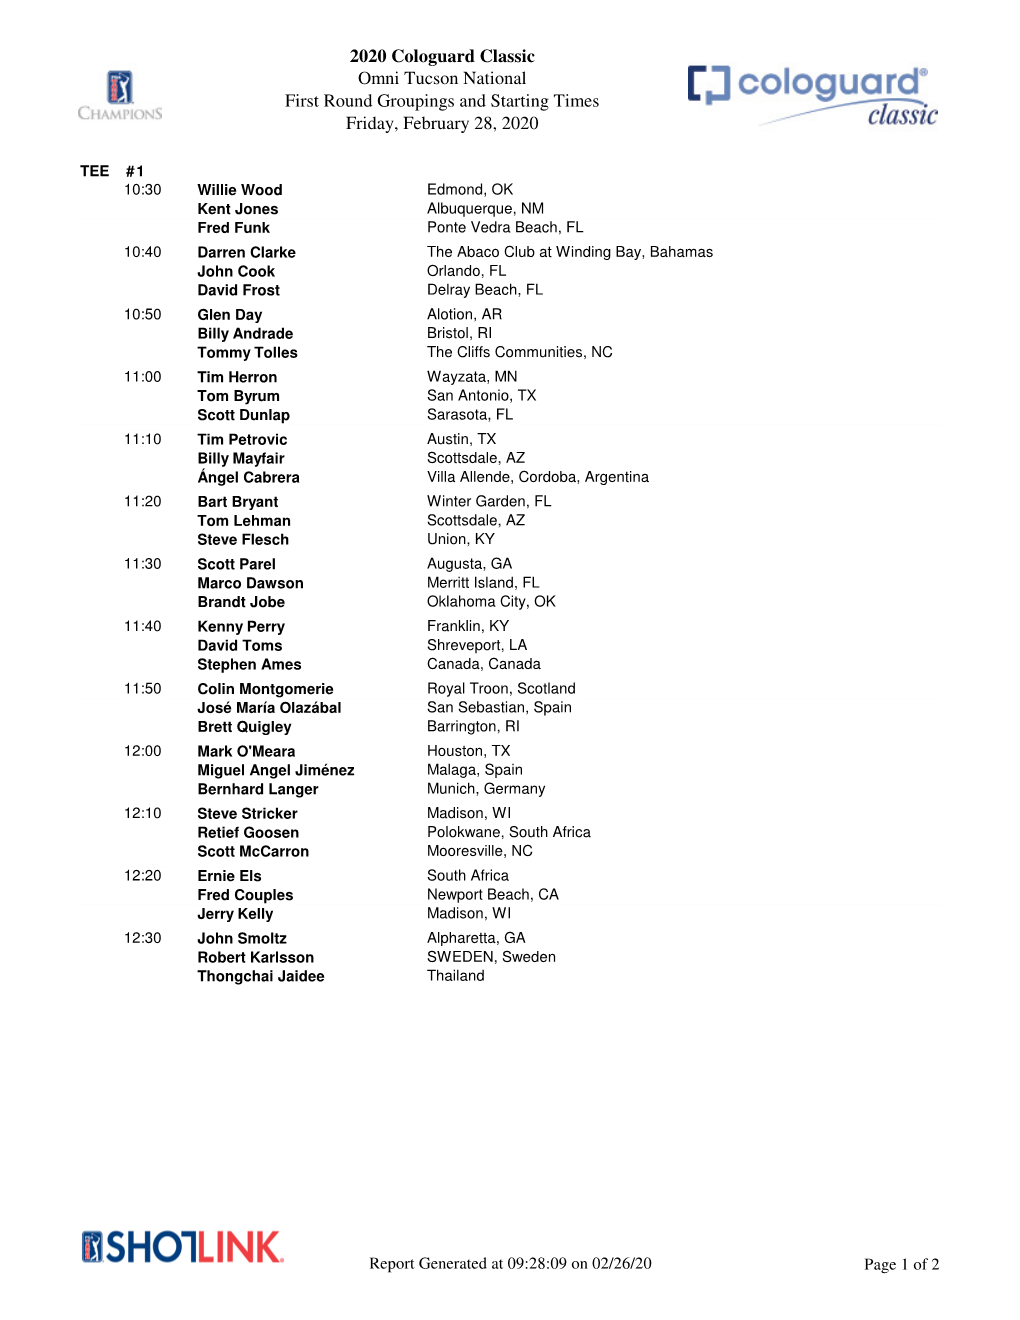 2020 Cologuard Classic Omni Tucson National First Round Groupings and Starting Times Friday, February 28, 2020